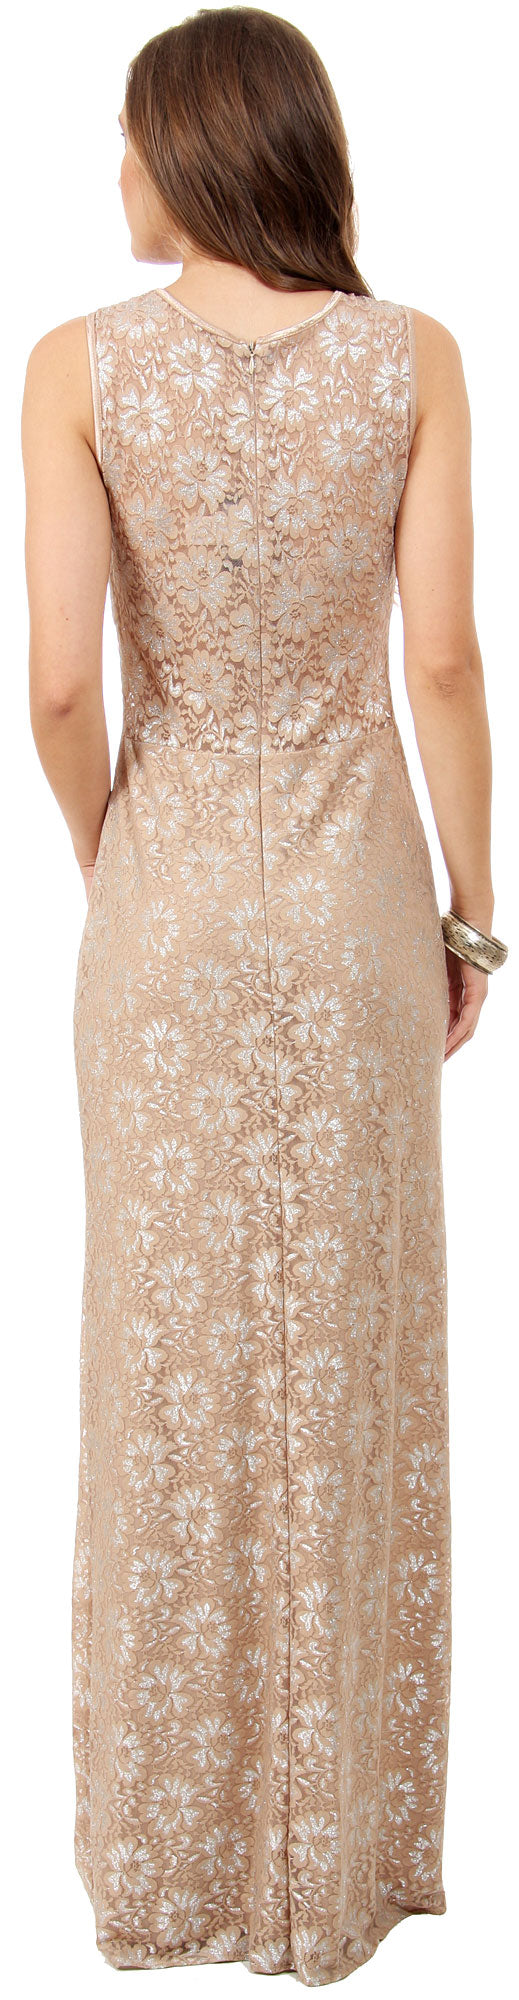 Image of Floral Metallic Lace Long Formal Bridesmaid Dress back in Taupe